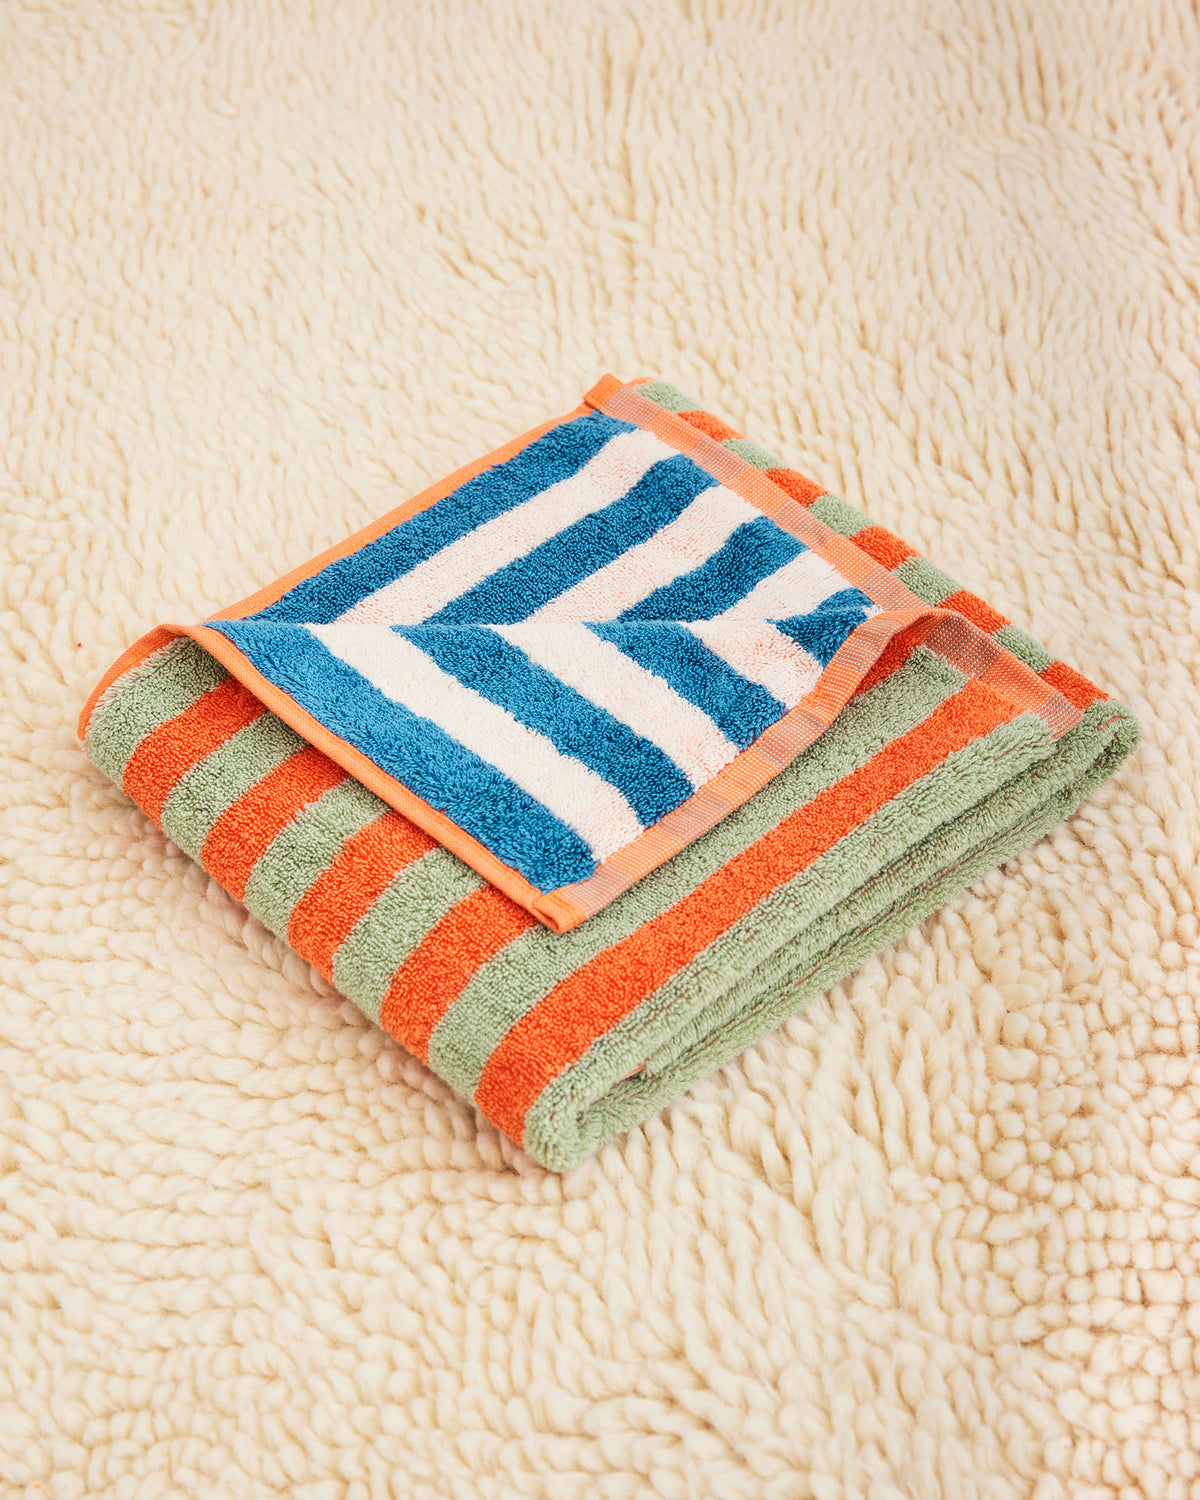 Dusen Dusen Earth Stripe Towels. 100% brushed cotton terry, 700 GSM, reversible striped colorways. Bath towel: 30"x56". Hand towel: 20"x 30". Washcloth: 12"x12". Made in Turkey.